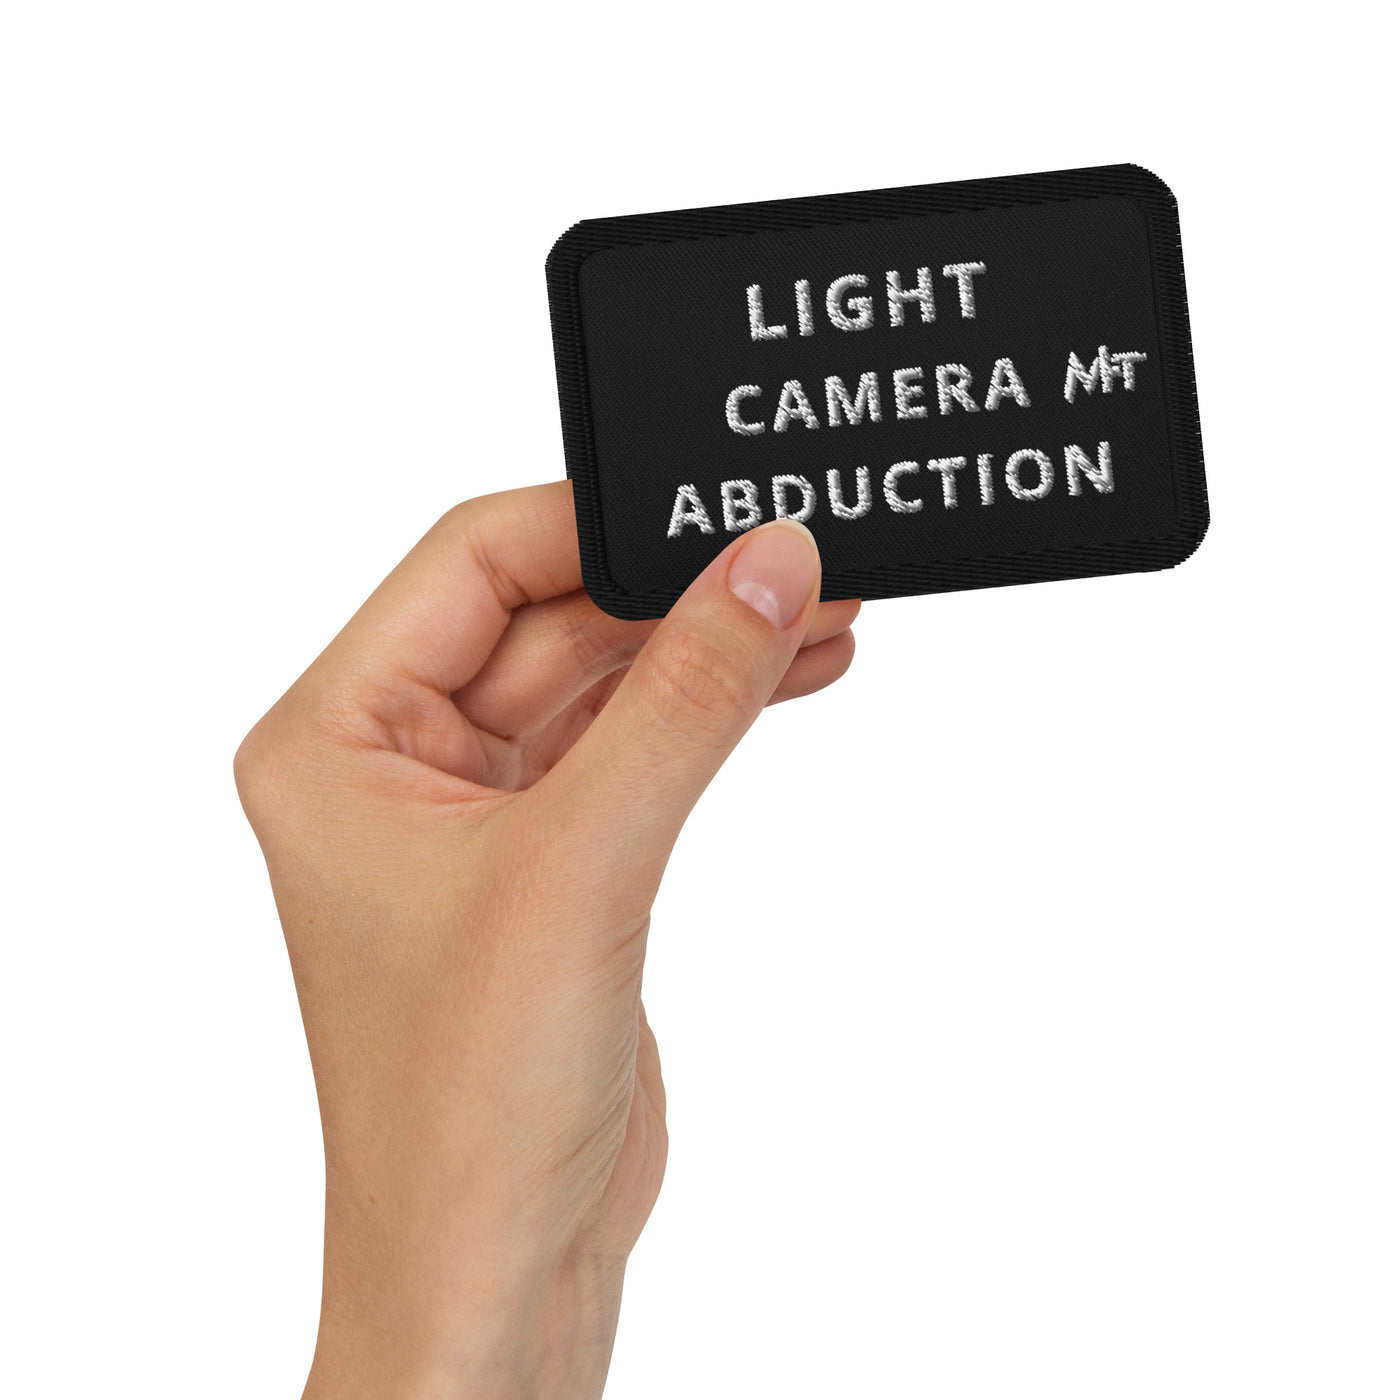 Light, Camera and Abduction - Embroidered patches